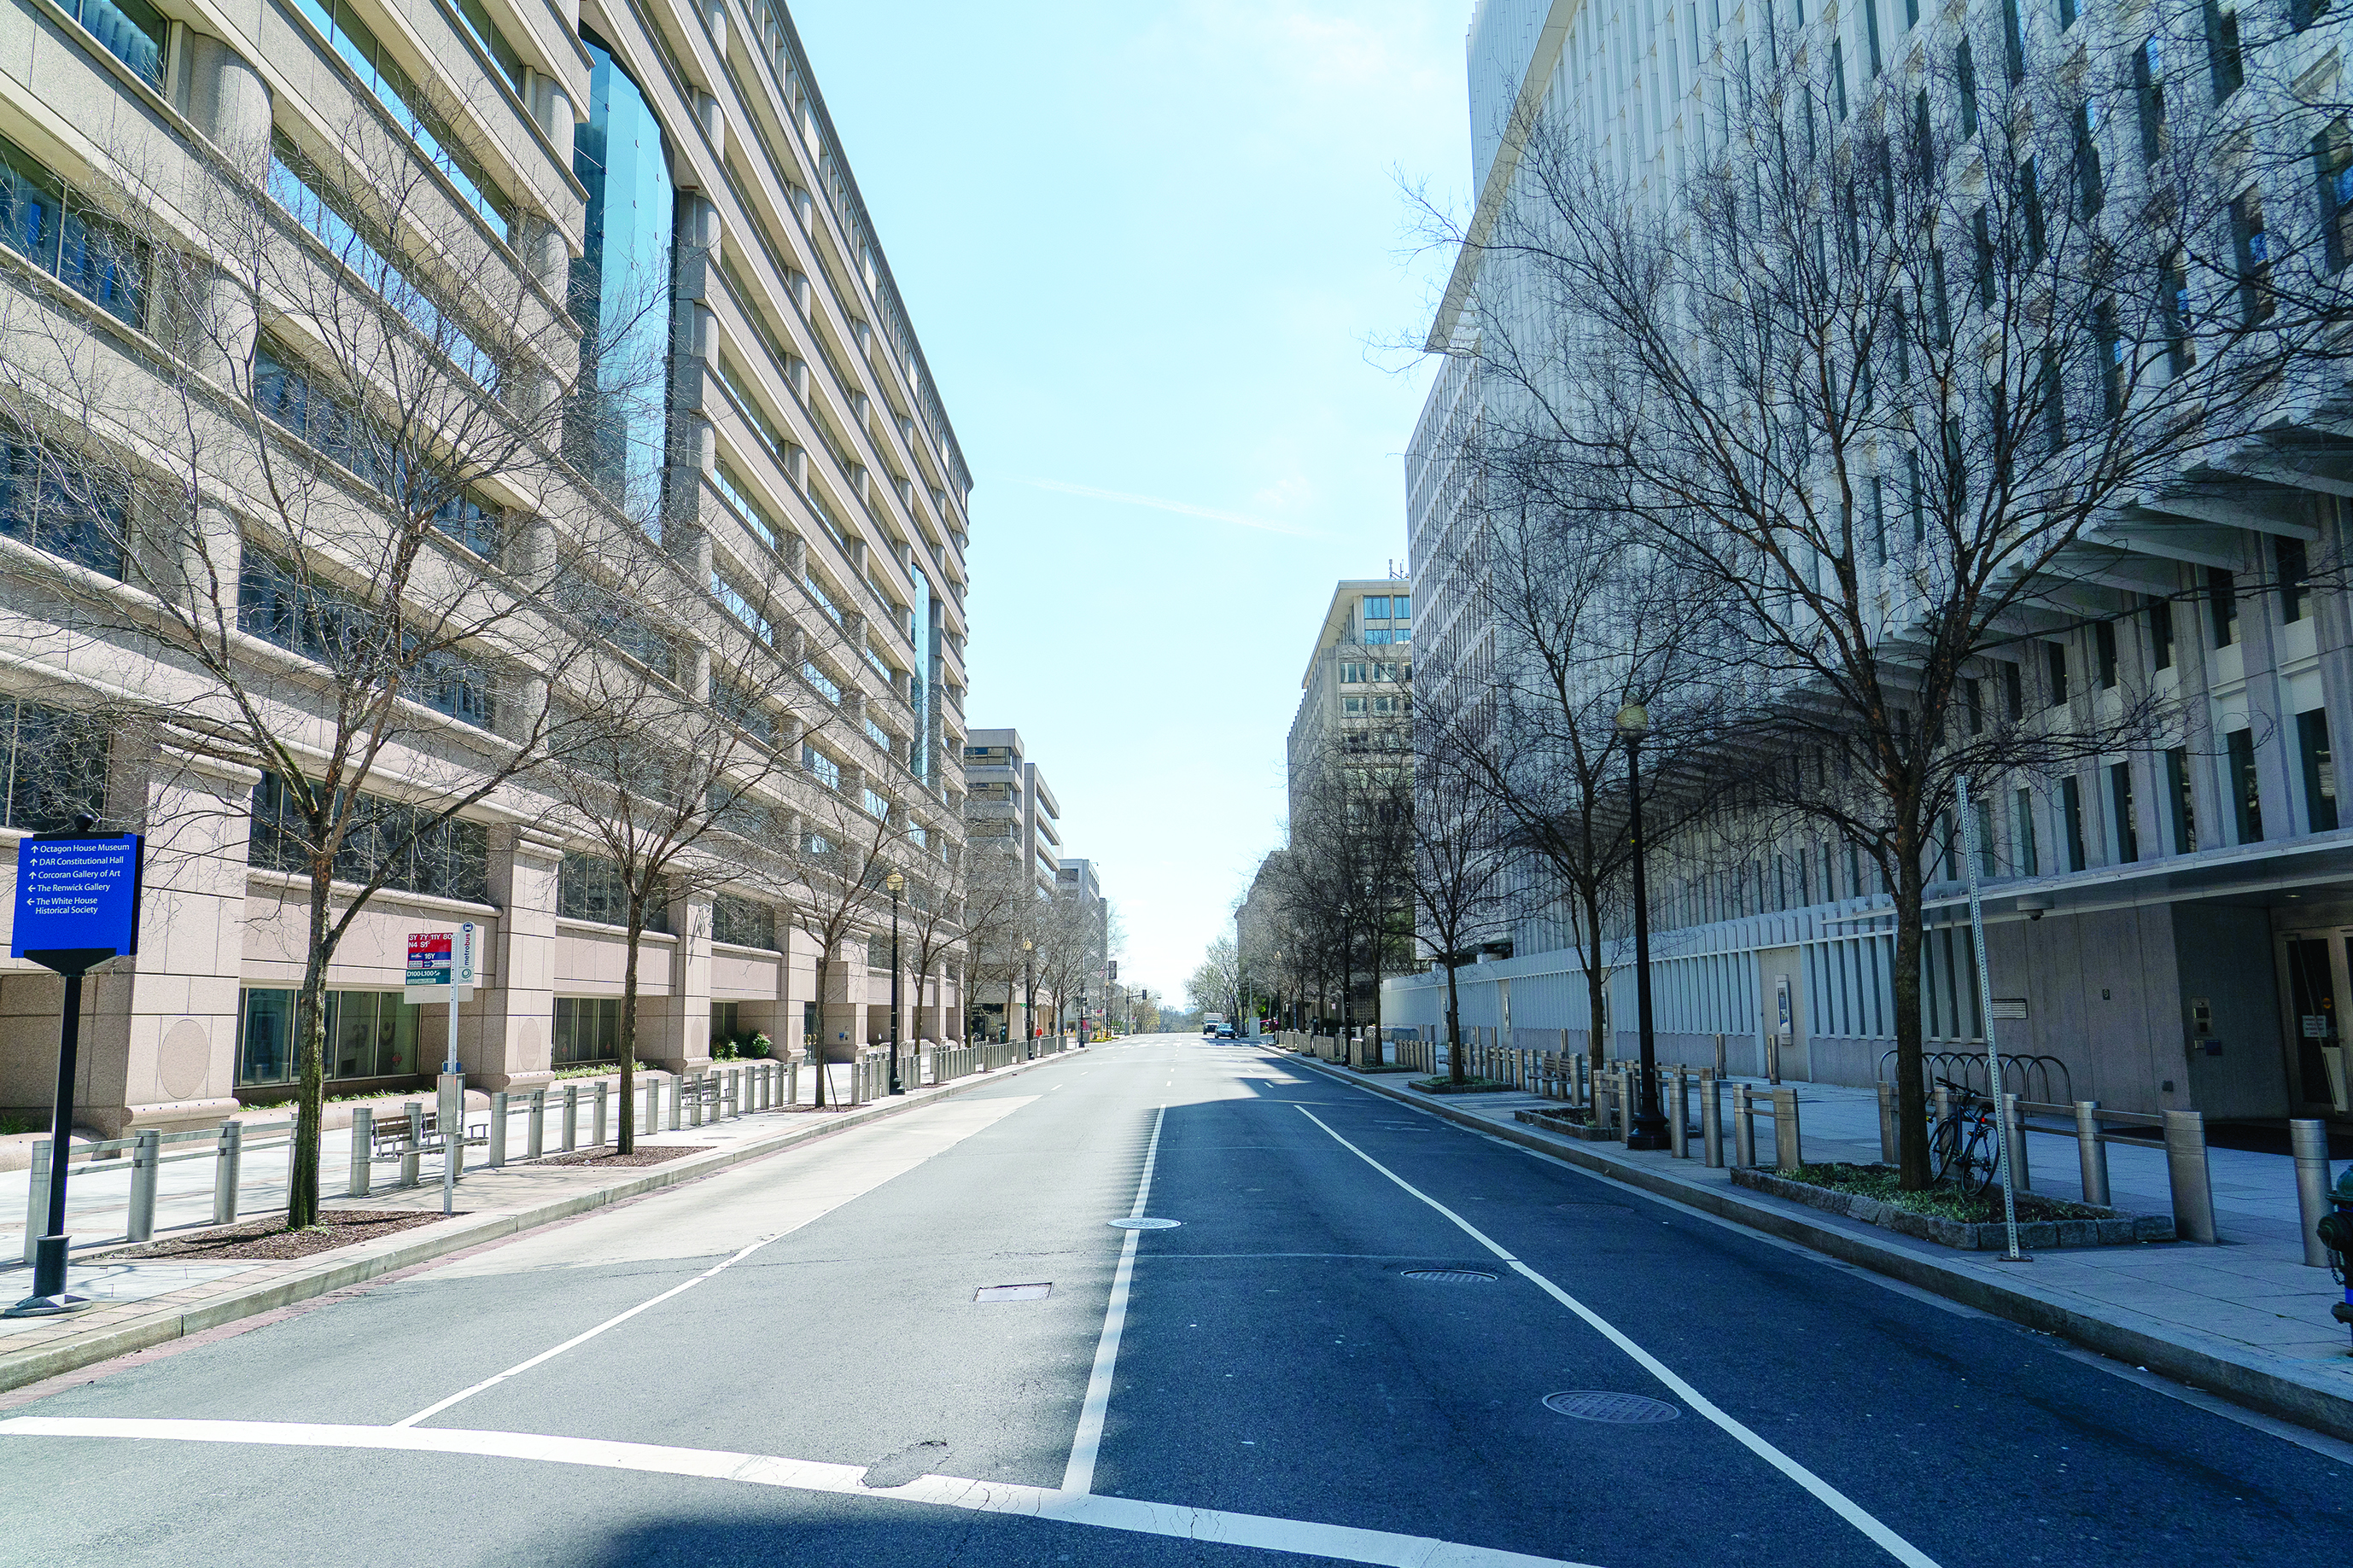 An empty downtown street is seen near the World Bank on March 26, 2020, in Washington, DC. - President Donald Trump, keen for an early lifting of economically costly social distancing measures against the coronavirus, said he would propose dividing the United States by risk levels. In a letter to state governors released by the White House, Trump said that better testing now allows the mapping of virus threat on a local level. (Photo by Alex Edelman / AFP)